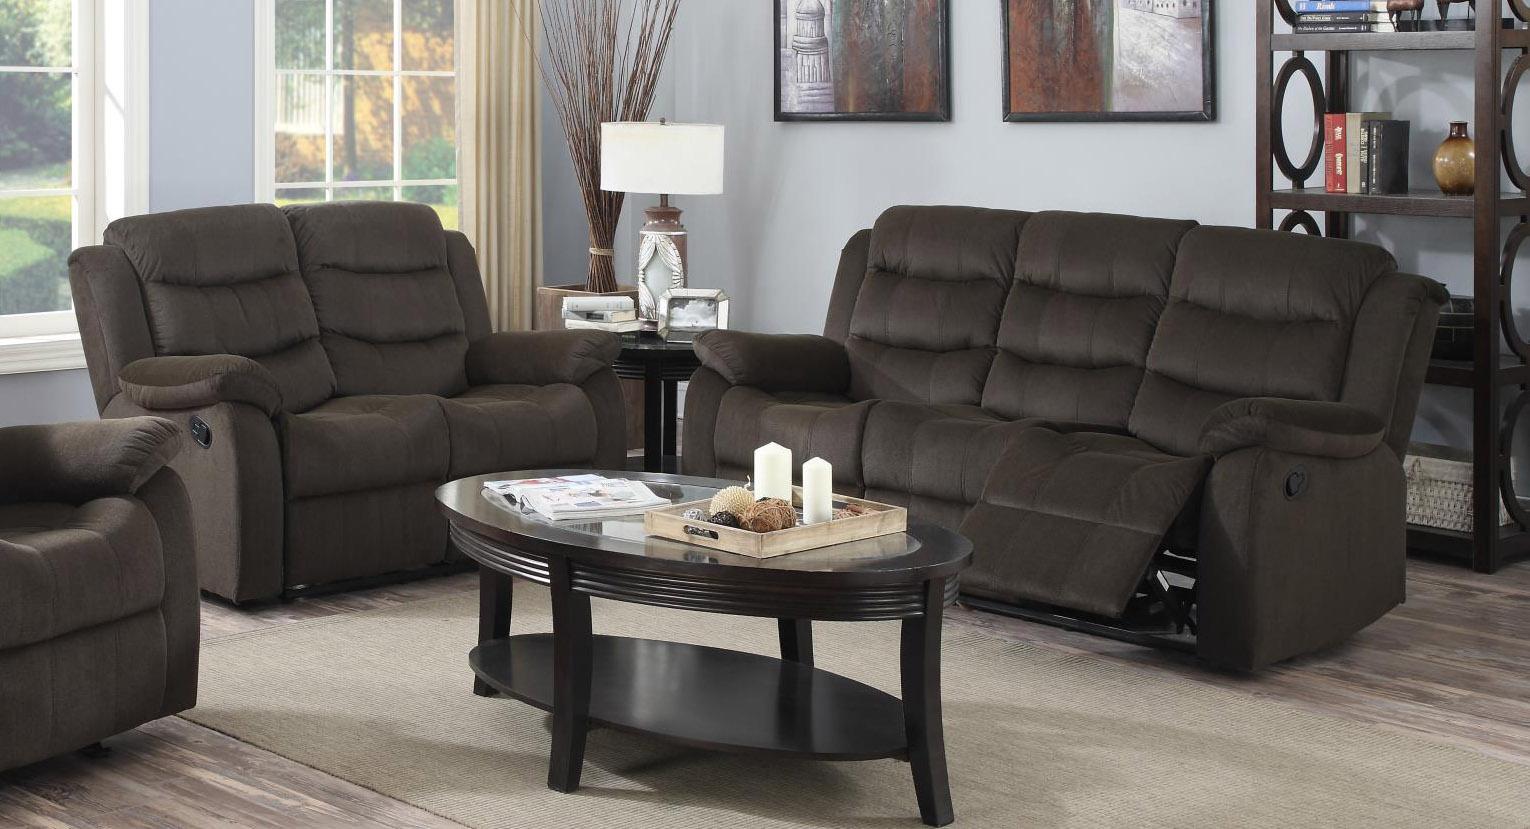 MYCO Furniture Candice Sectional Living Room Set